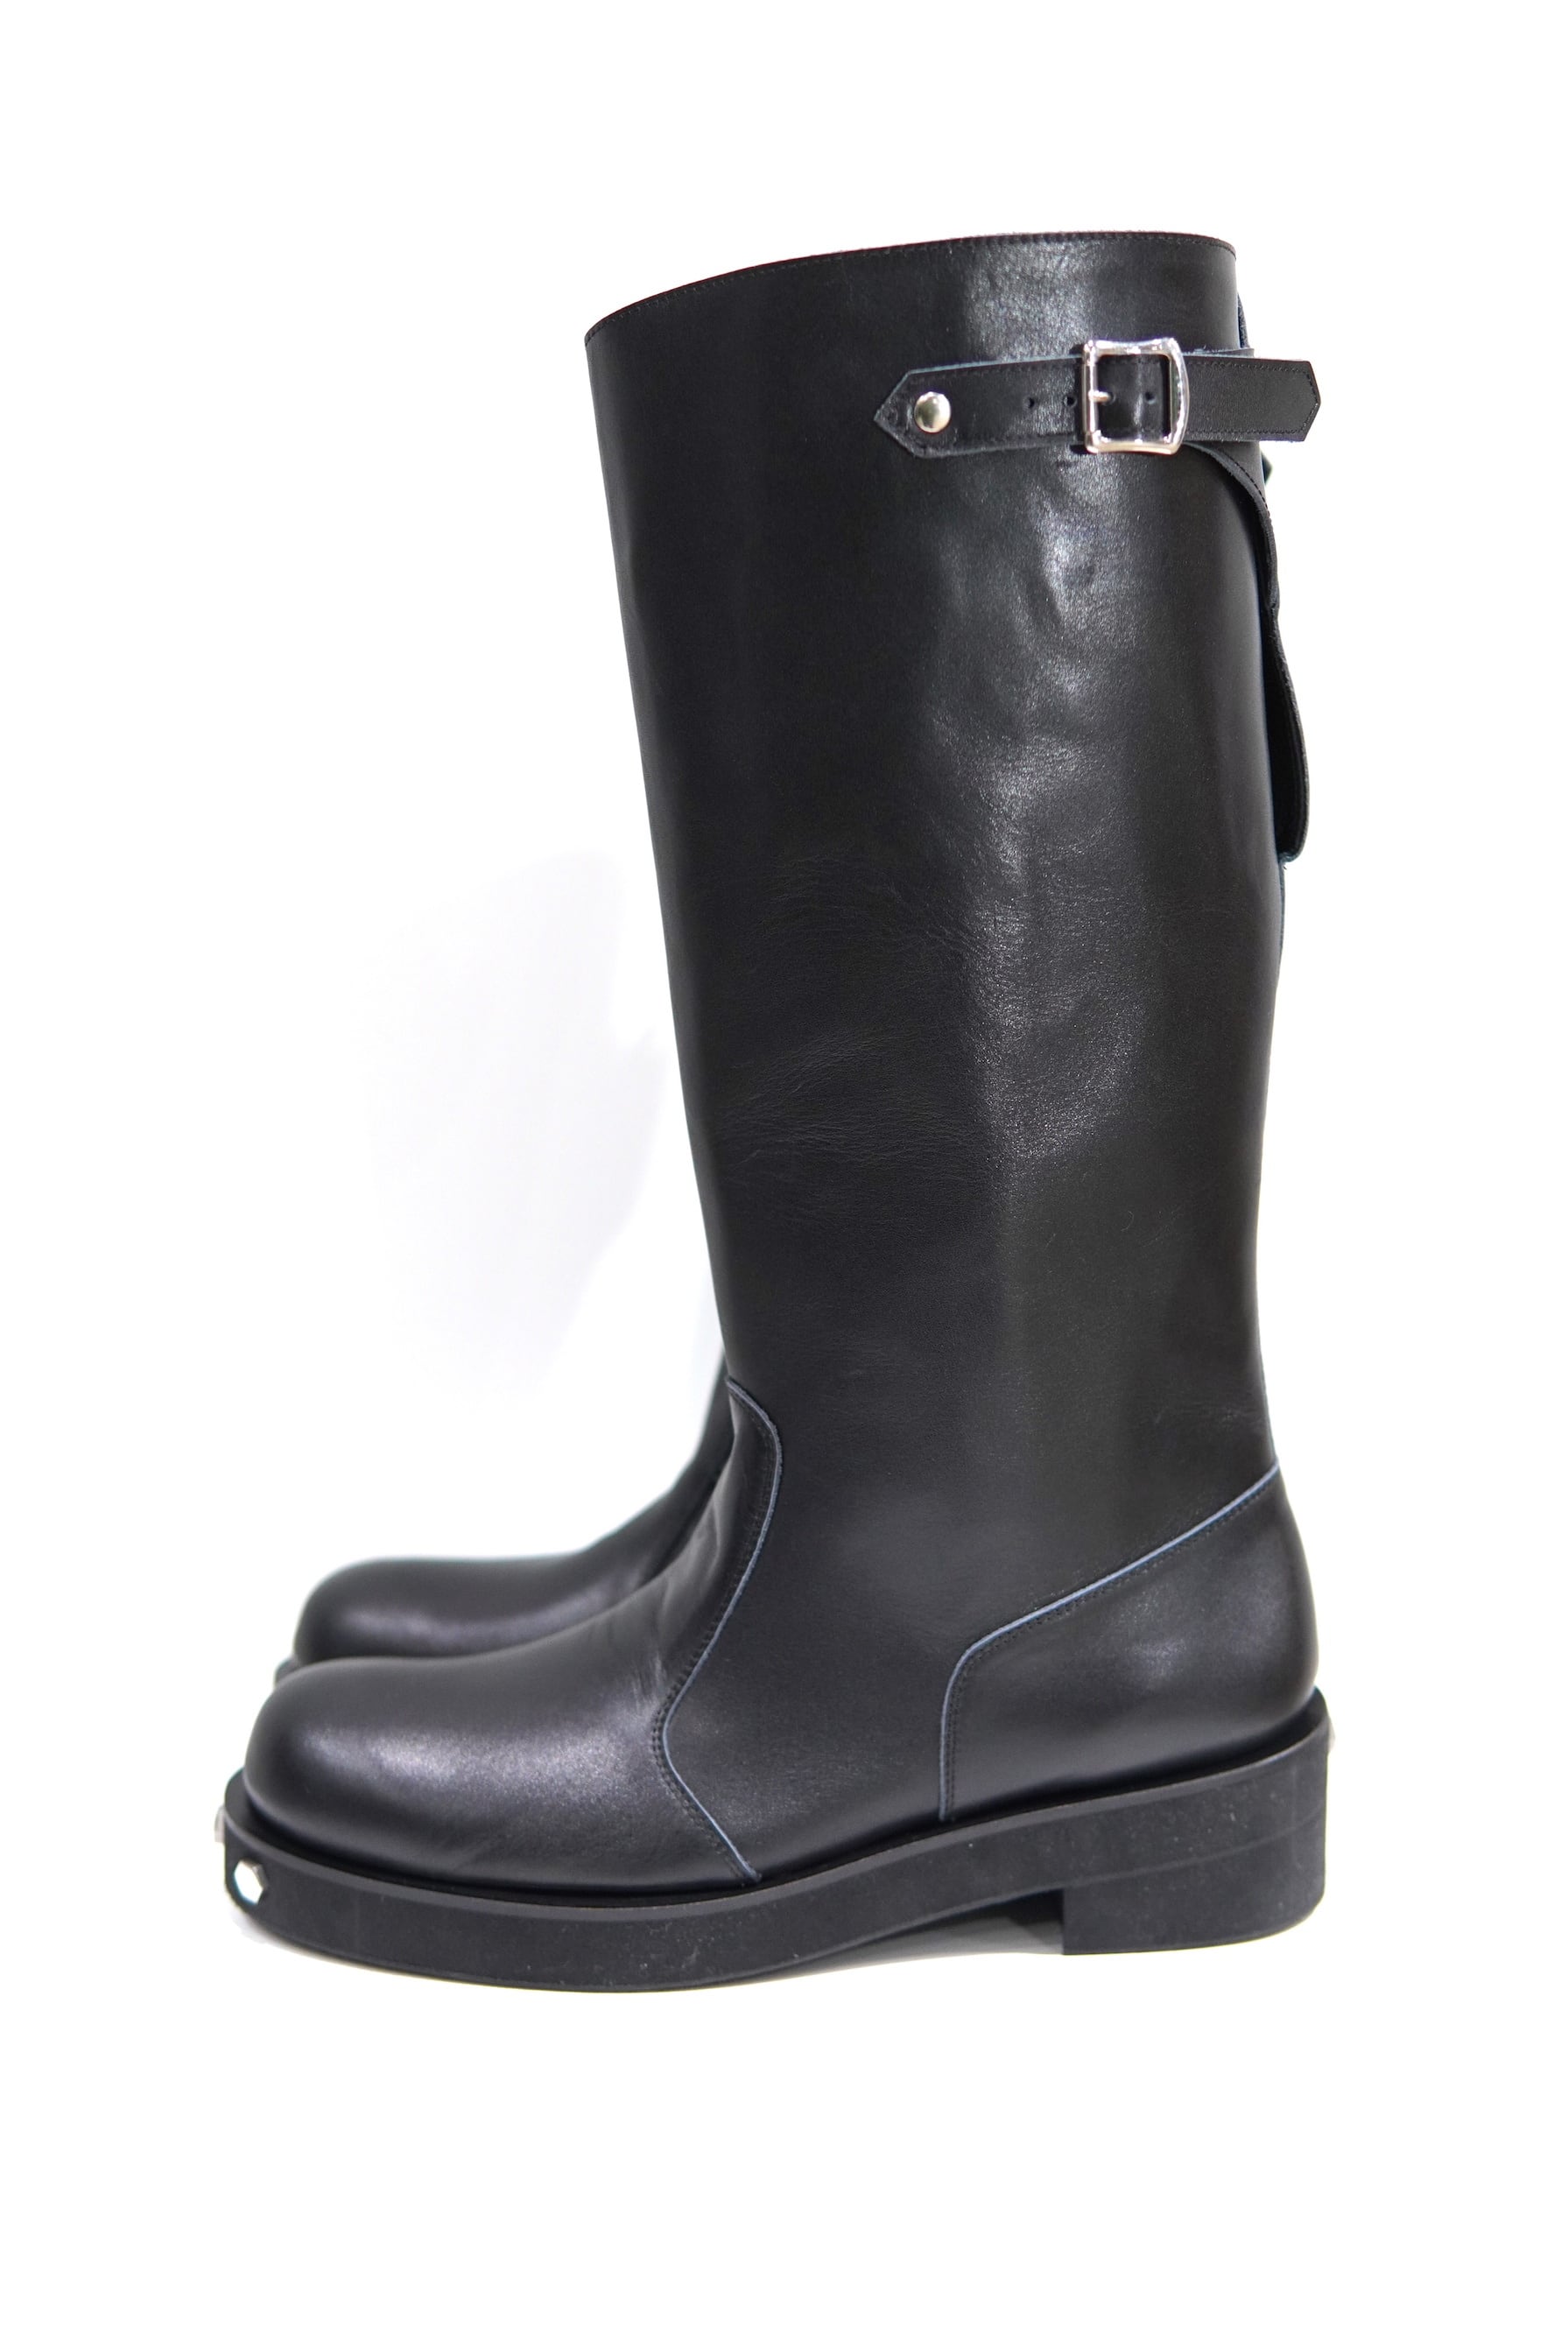 OUAT MORSE SPACE BOOTS 42 - ブーツ